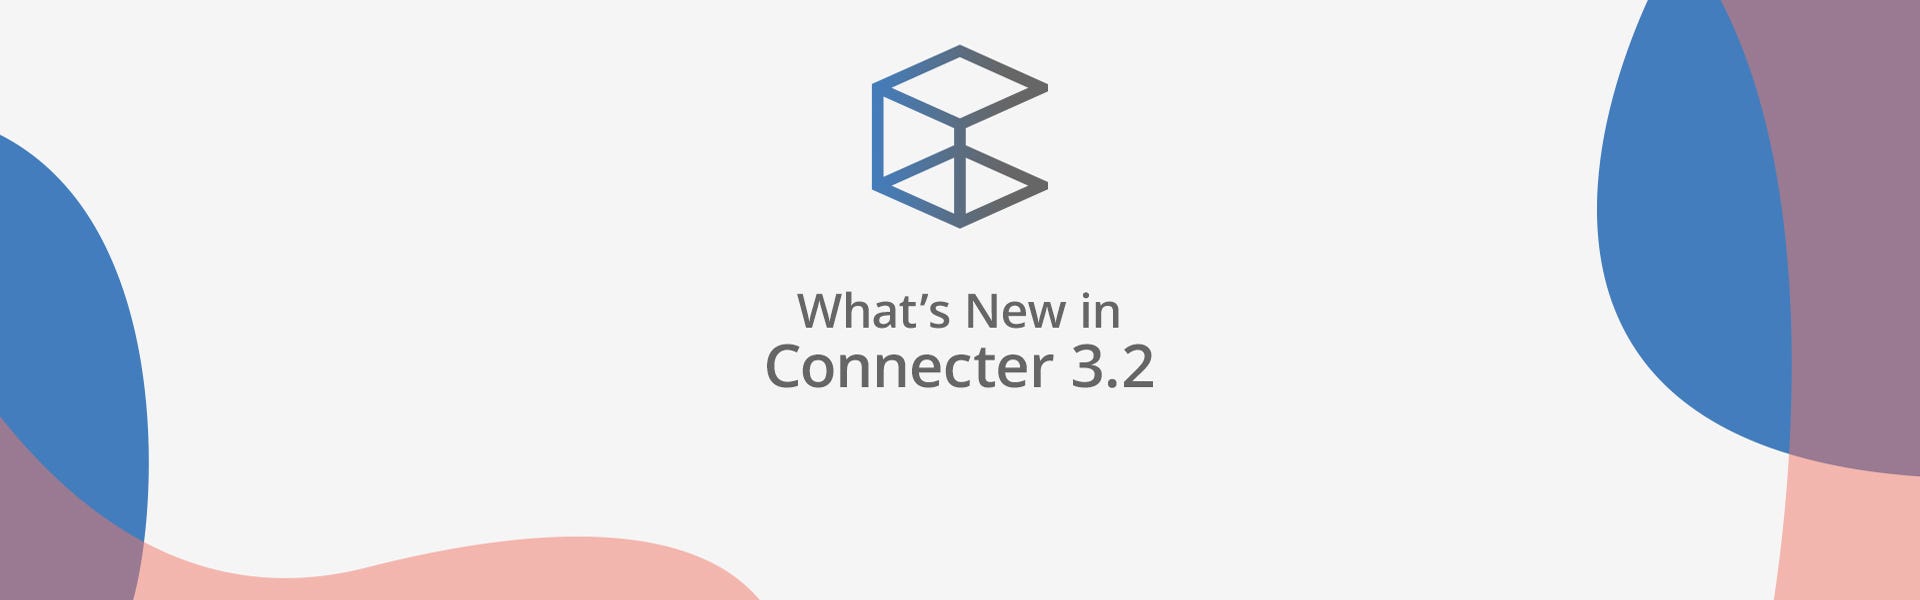 What’s new in Connecter 3.2